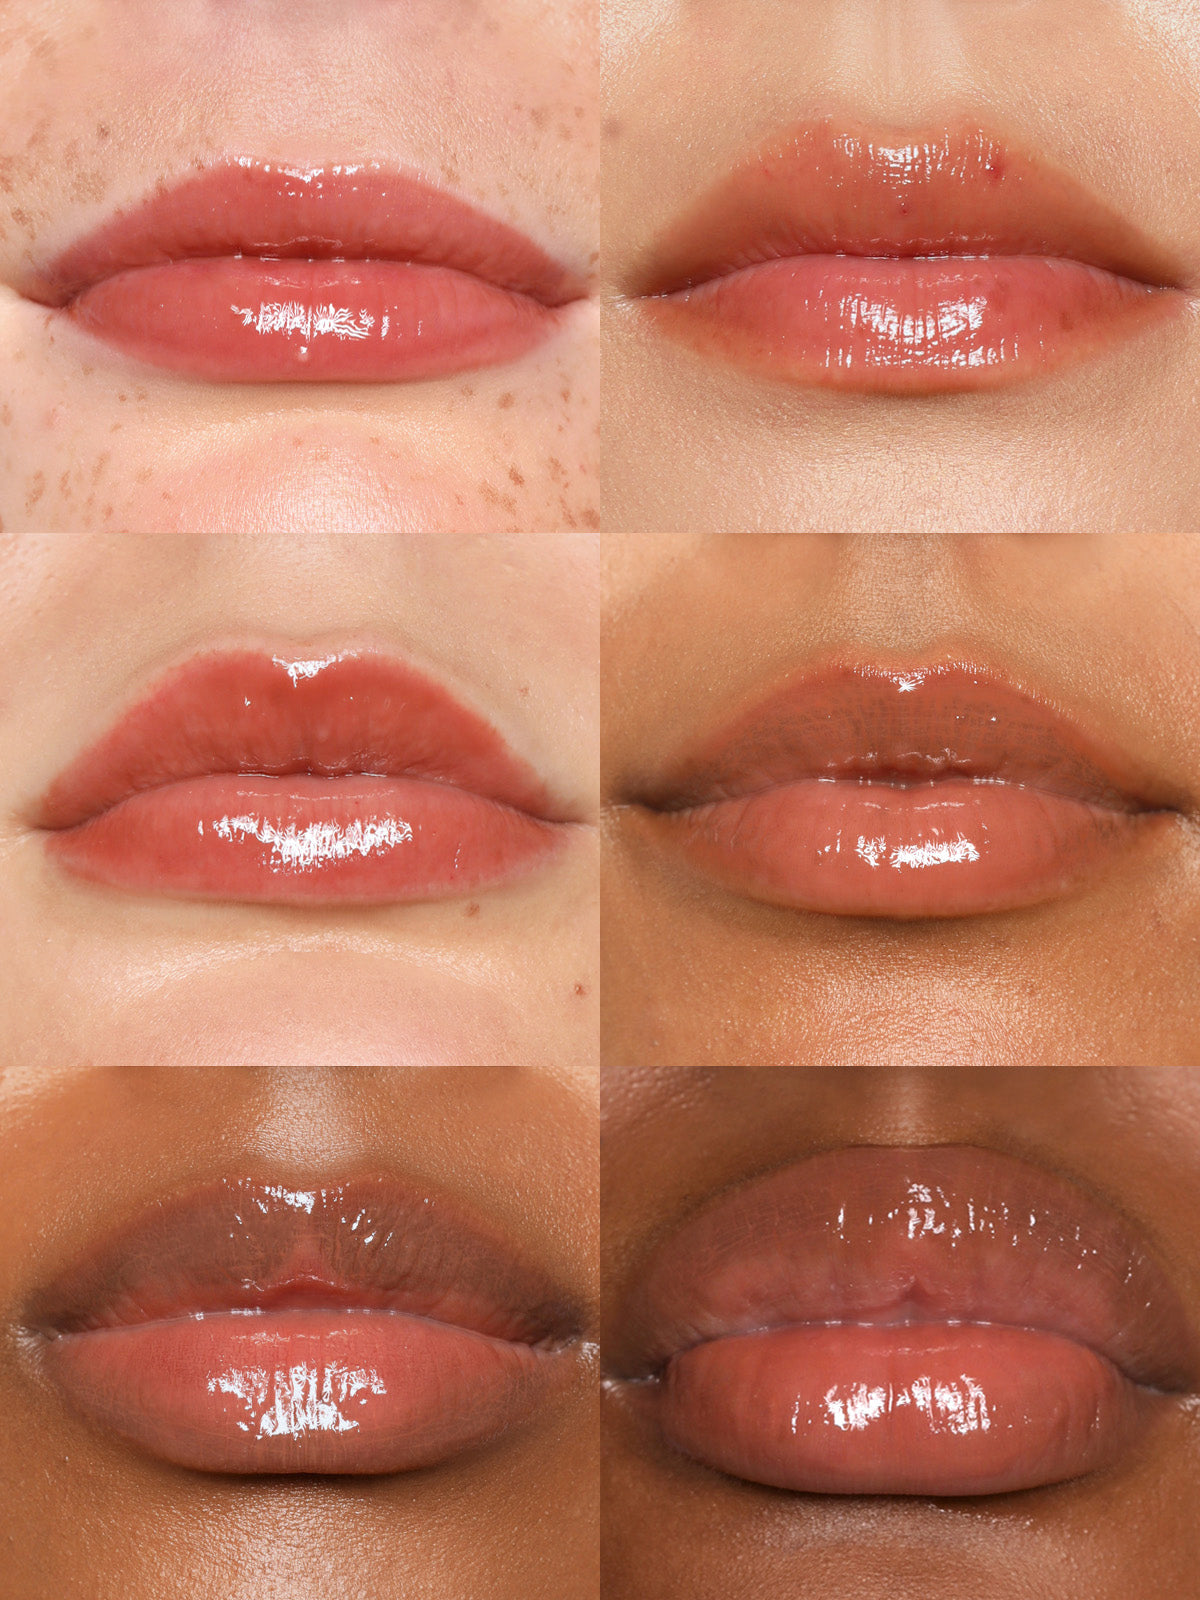 GRID OF REFY LIP GLOSS IN SHADE FAWN ON DIFFERENT SKIN TONES